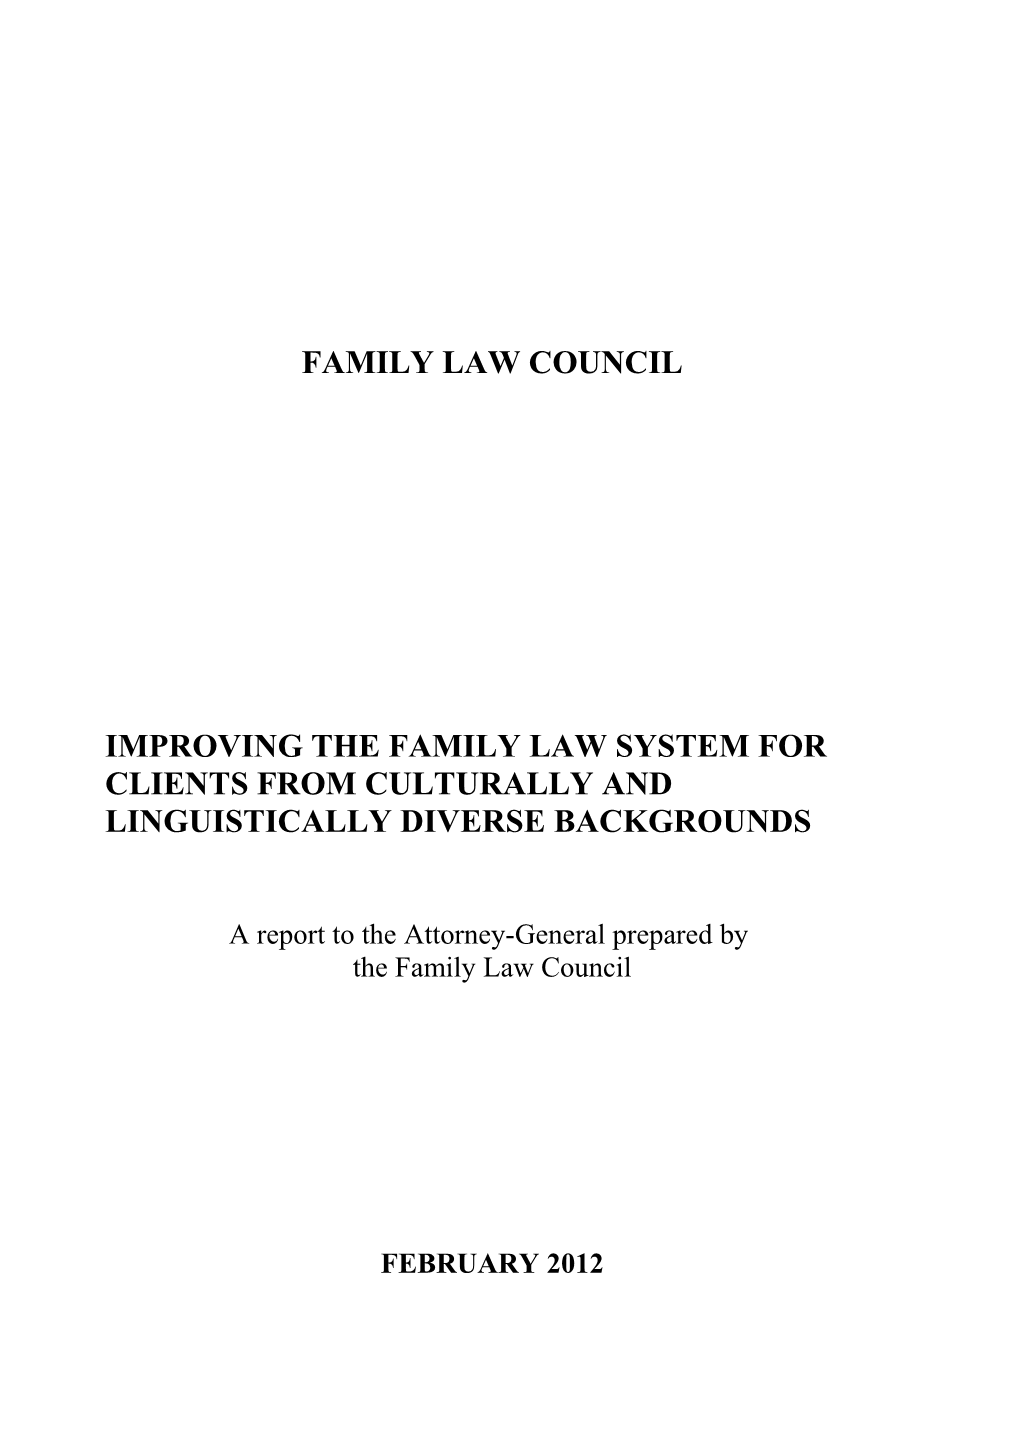 Improving the Family Law System for Clients from Culturally and Linguistically Diverse